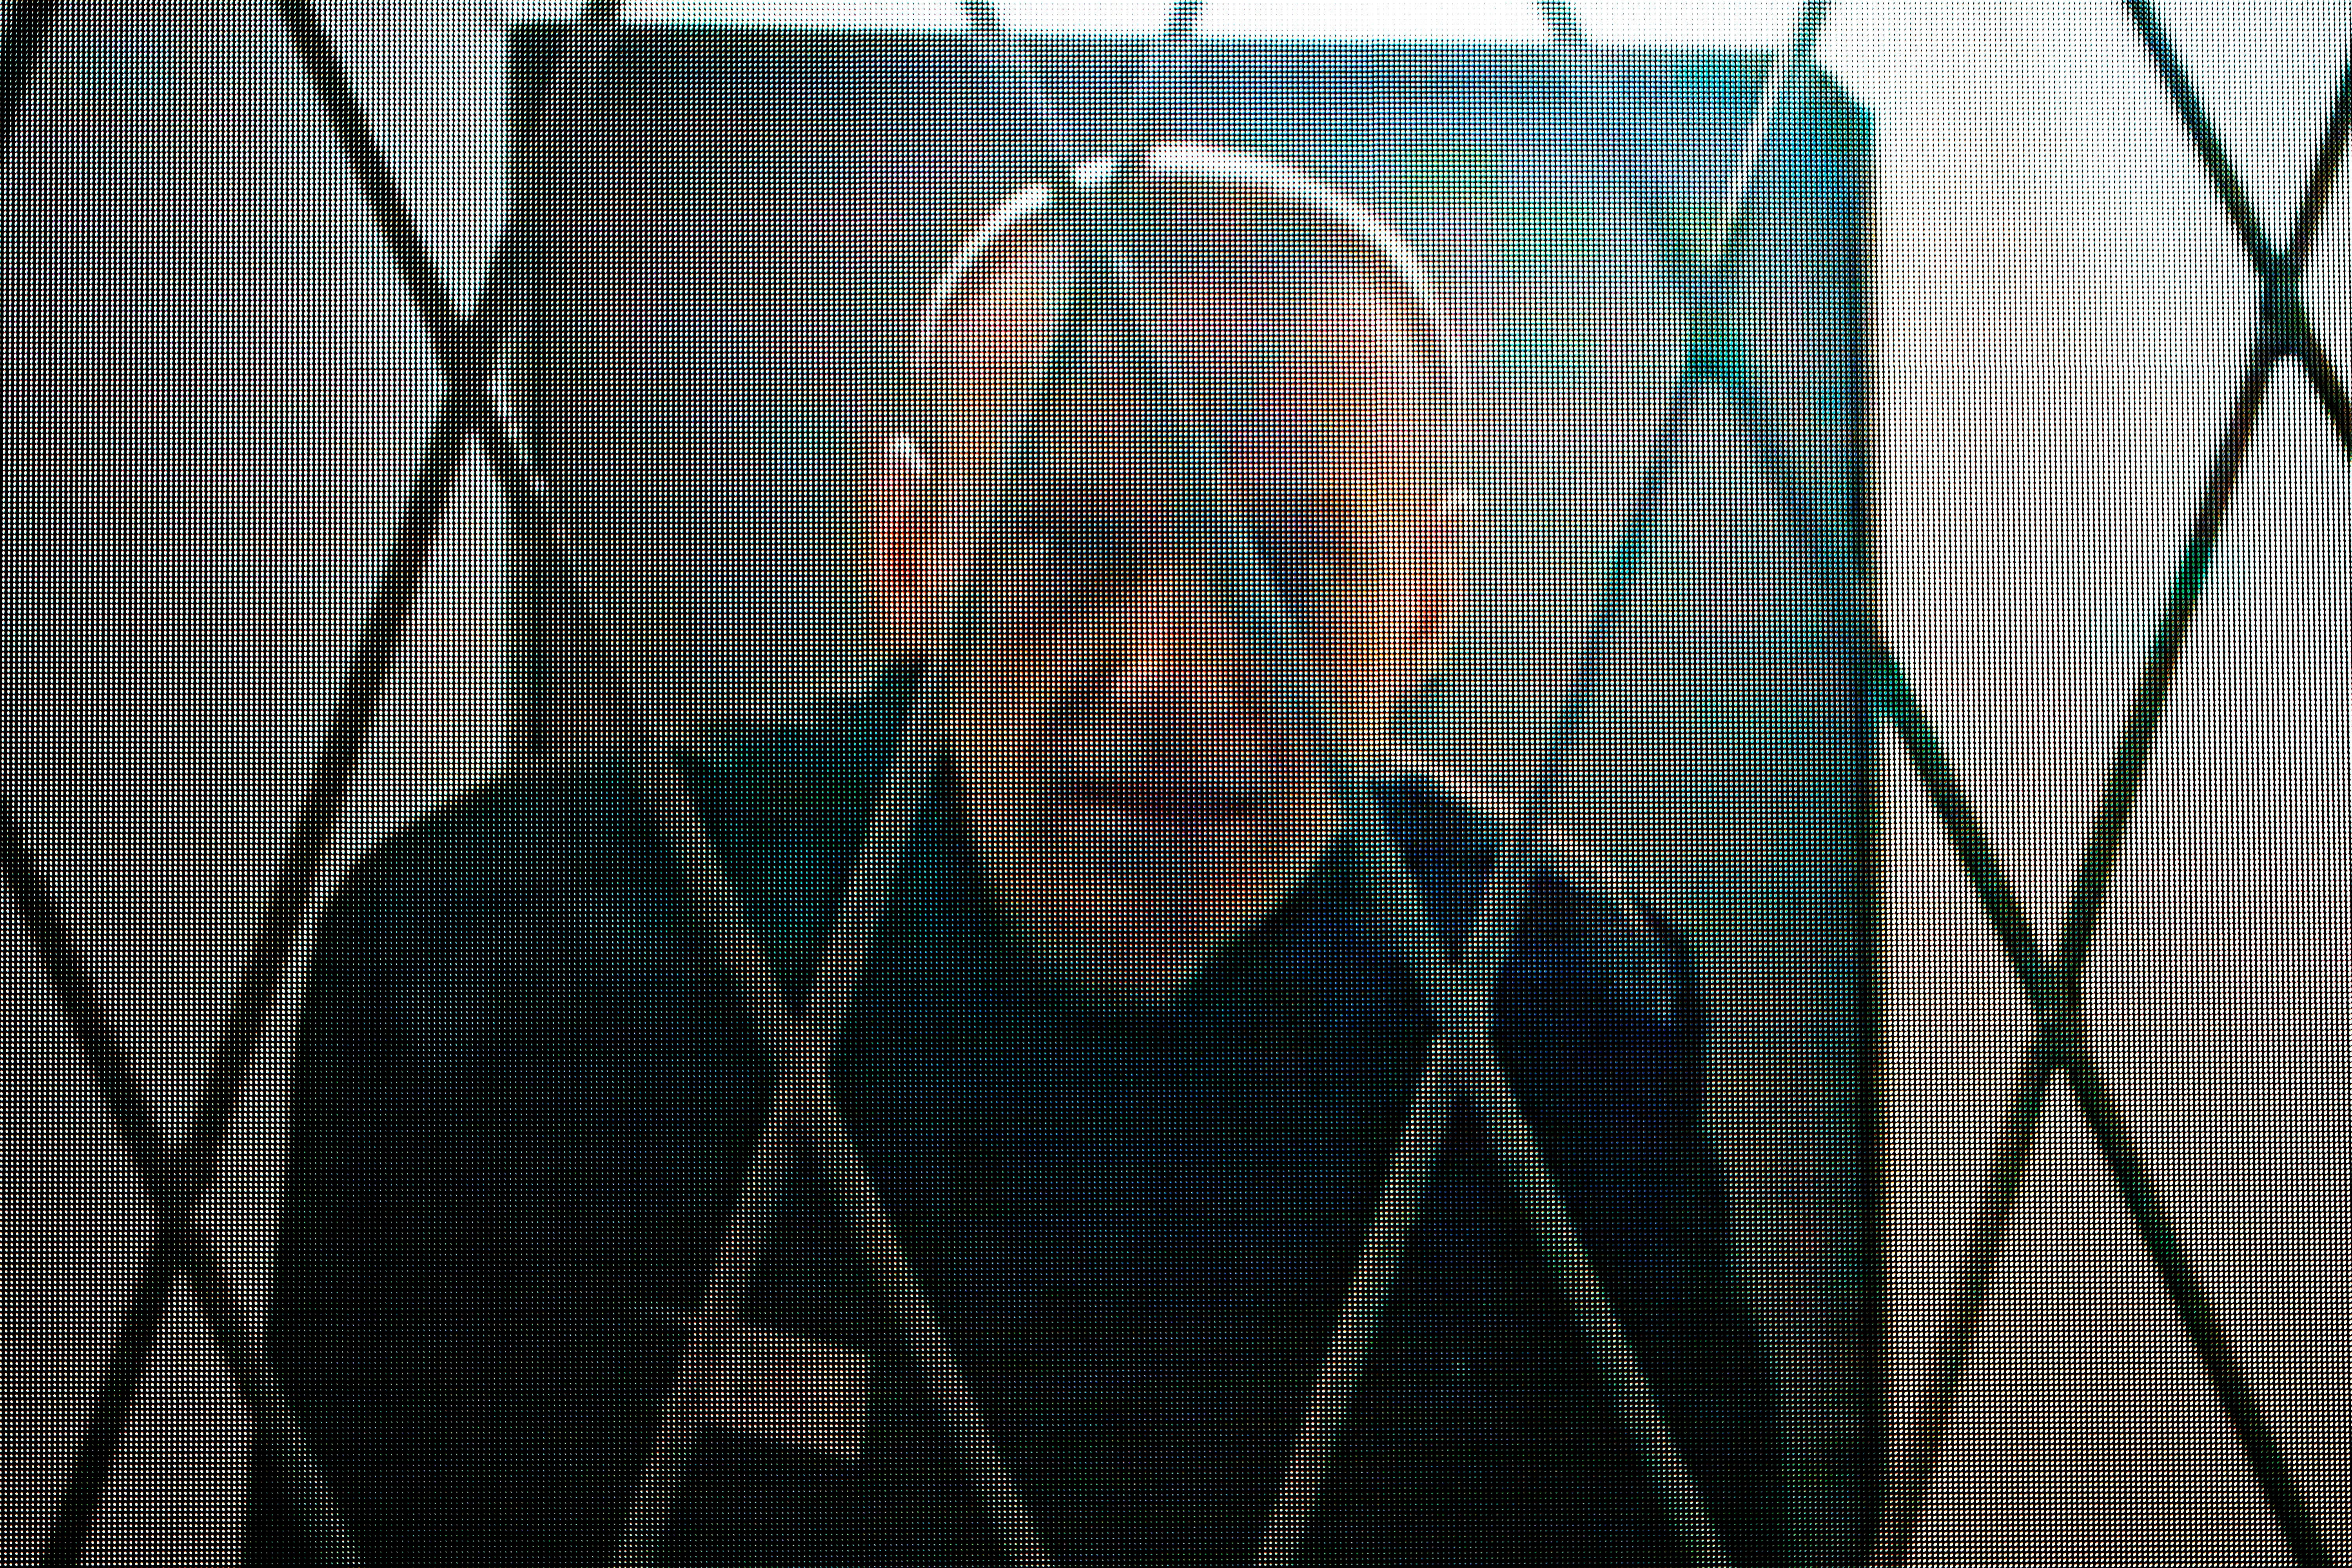 Russian opposition leader Alexei Navalny is seen via a video link for the first time since being moved to an Arctic penal colony